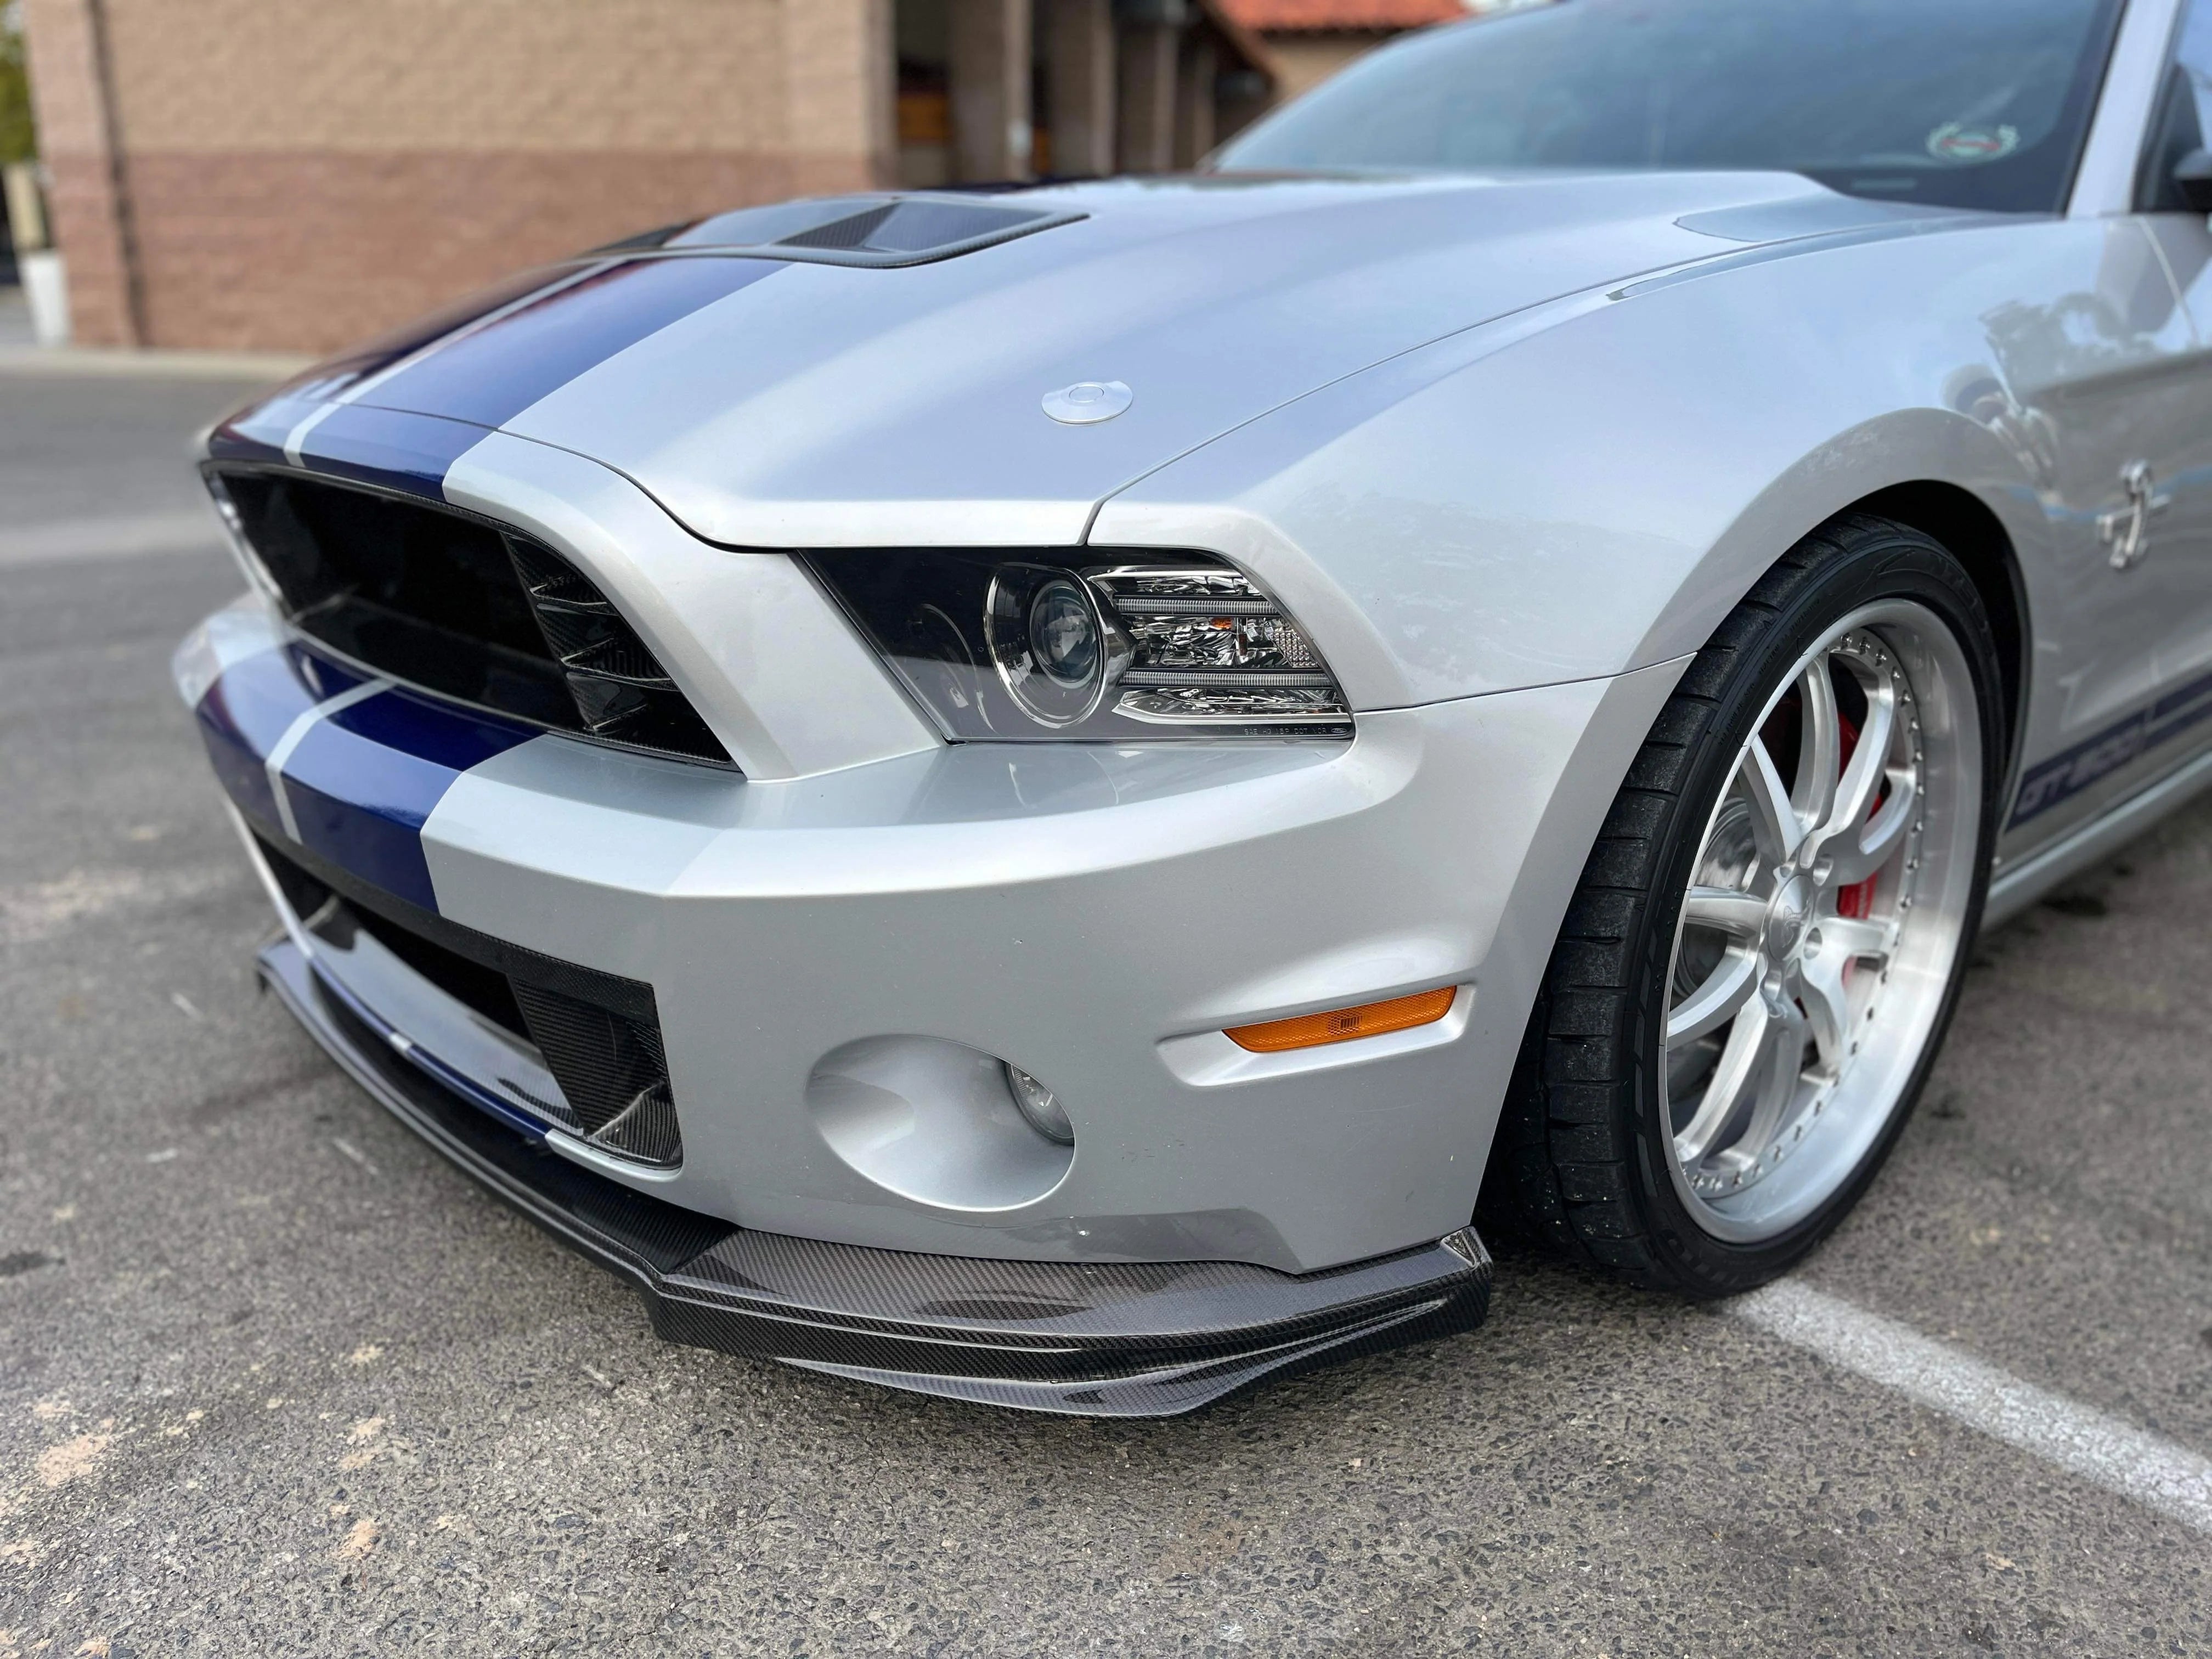 Anderson Composites 2010 - 2014 Mustang Shelby GT500 Type-OE Carbon Fiber Front Lip - AC-FL1213FDGT-OE